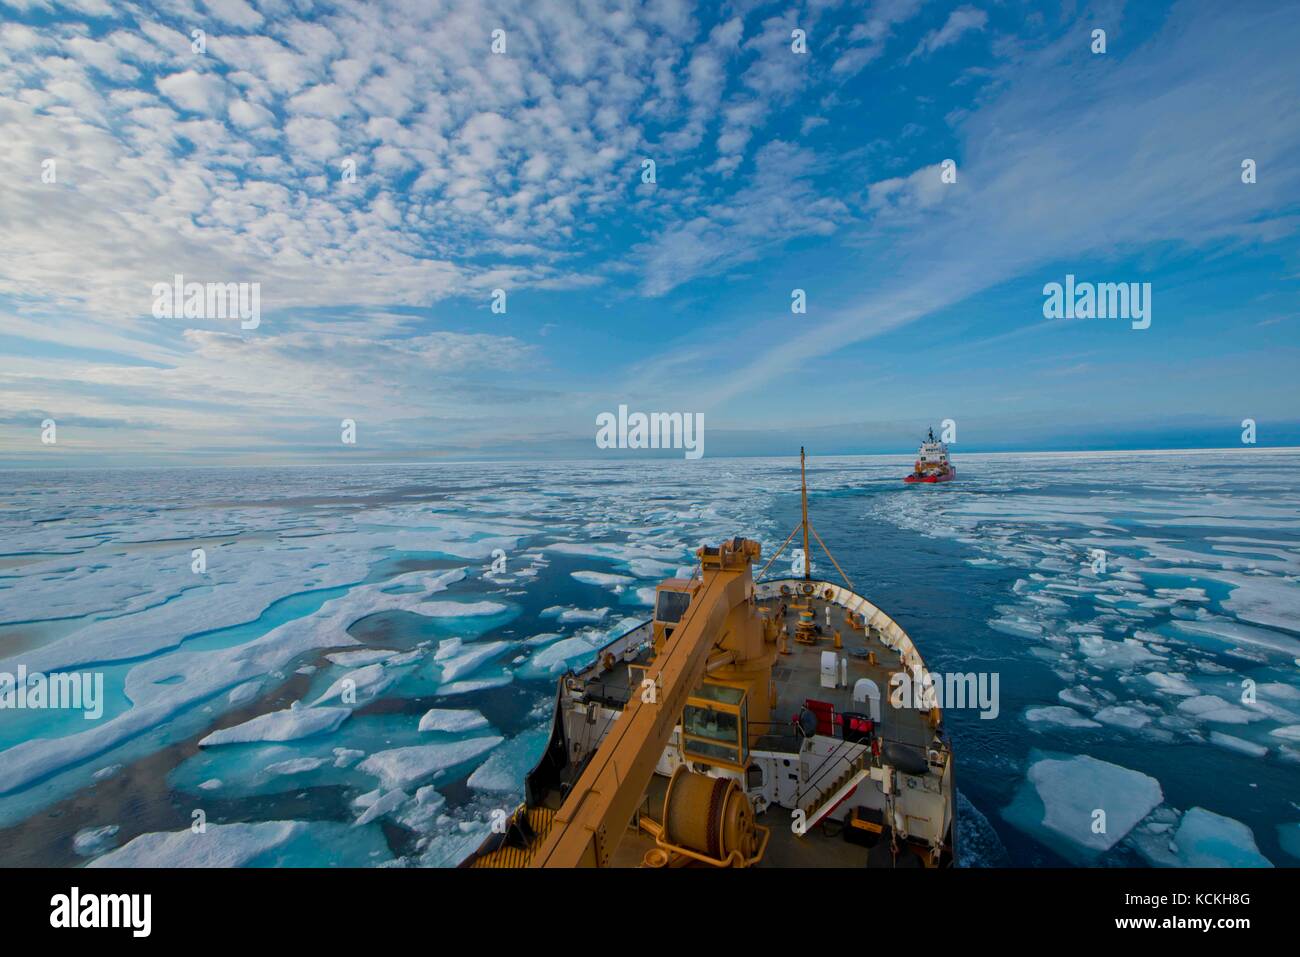 The U.S. Coast Guard Juniper-class seagoing buoy tender cutter USCGC Maple follows the Canadian Coast Guard Arctic Class 4 heavy icebreaker CCGS Terry Fox through the icy waters of the Franklin Strait during a Northwest Passage transit August 11, 2017 in Nunavut, Canada.    (photo by PO2 Nate Littlejohn via Planetpix) Stock Photo